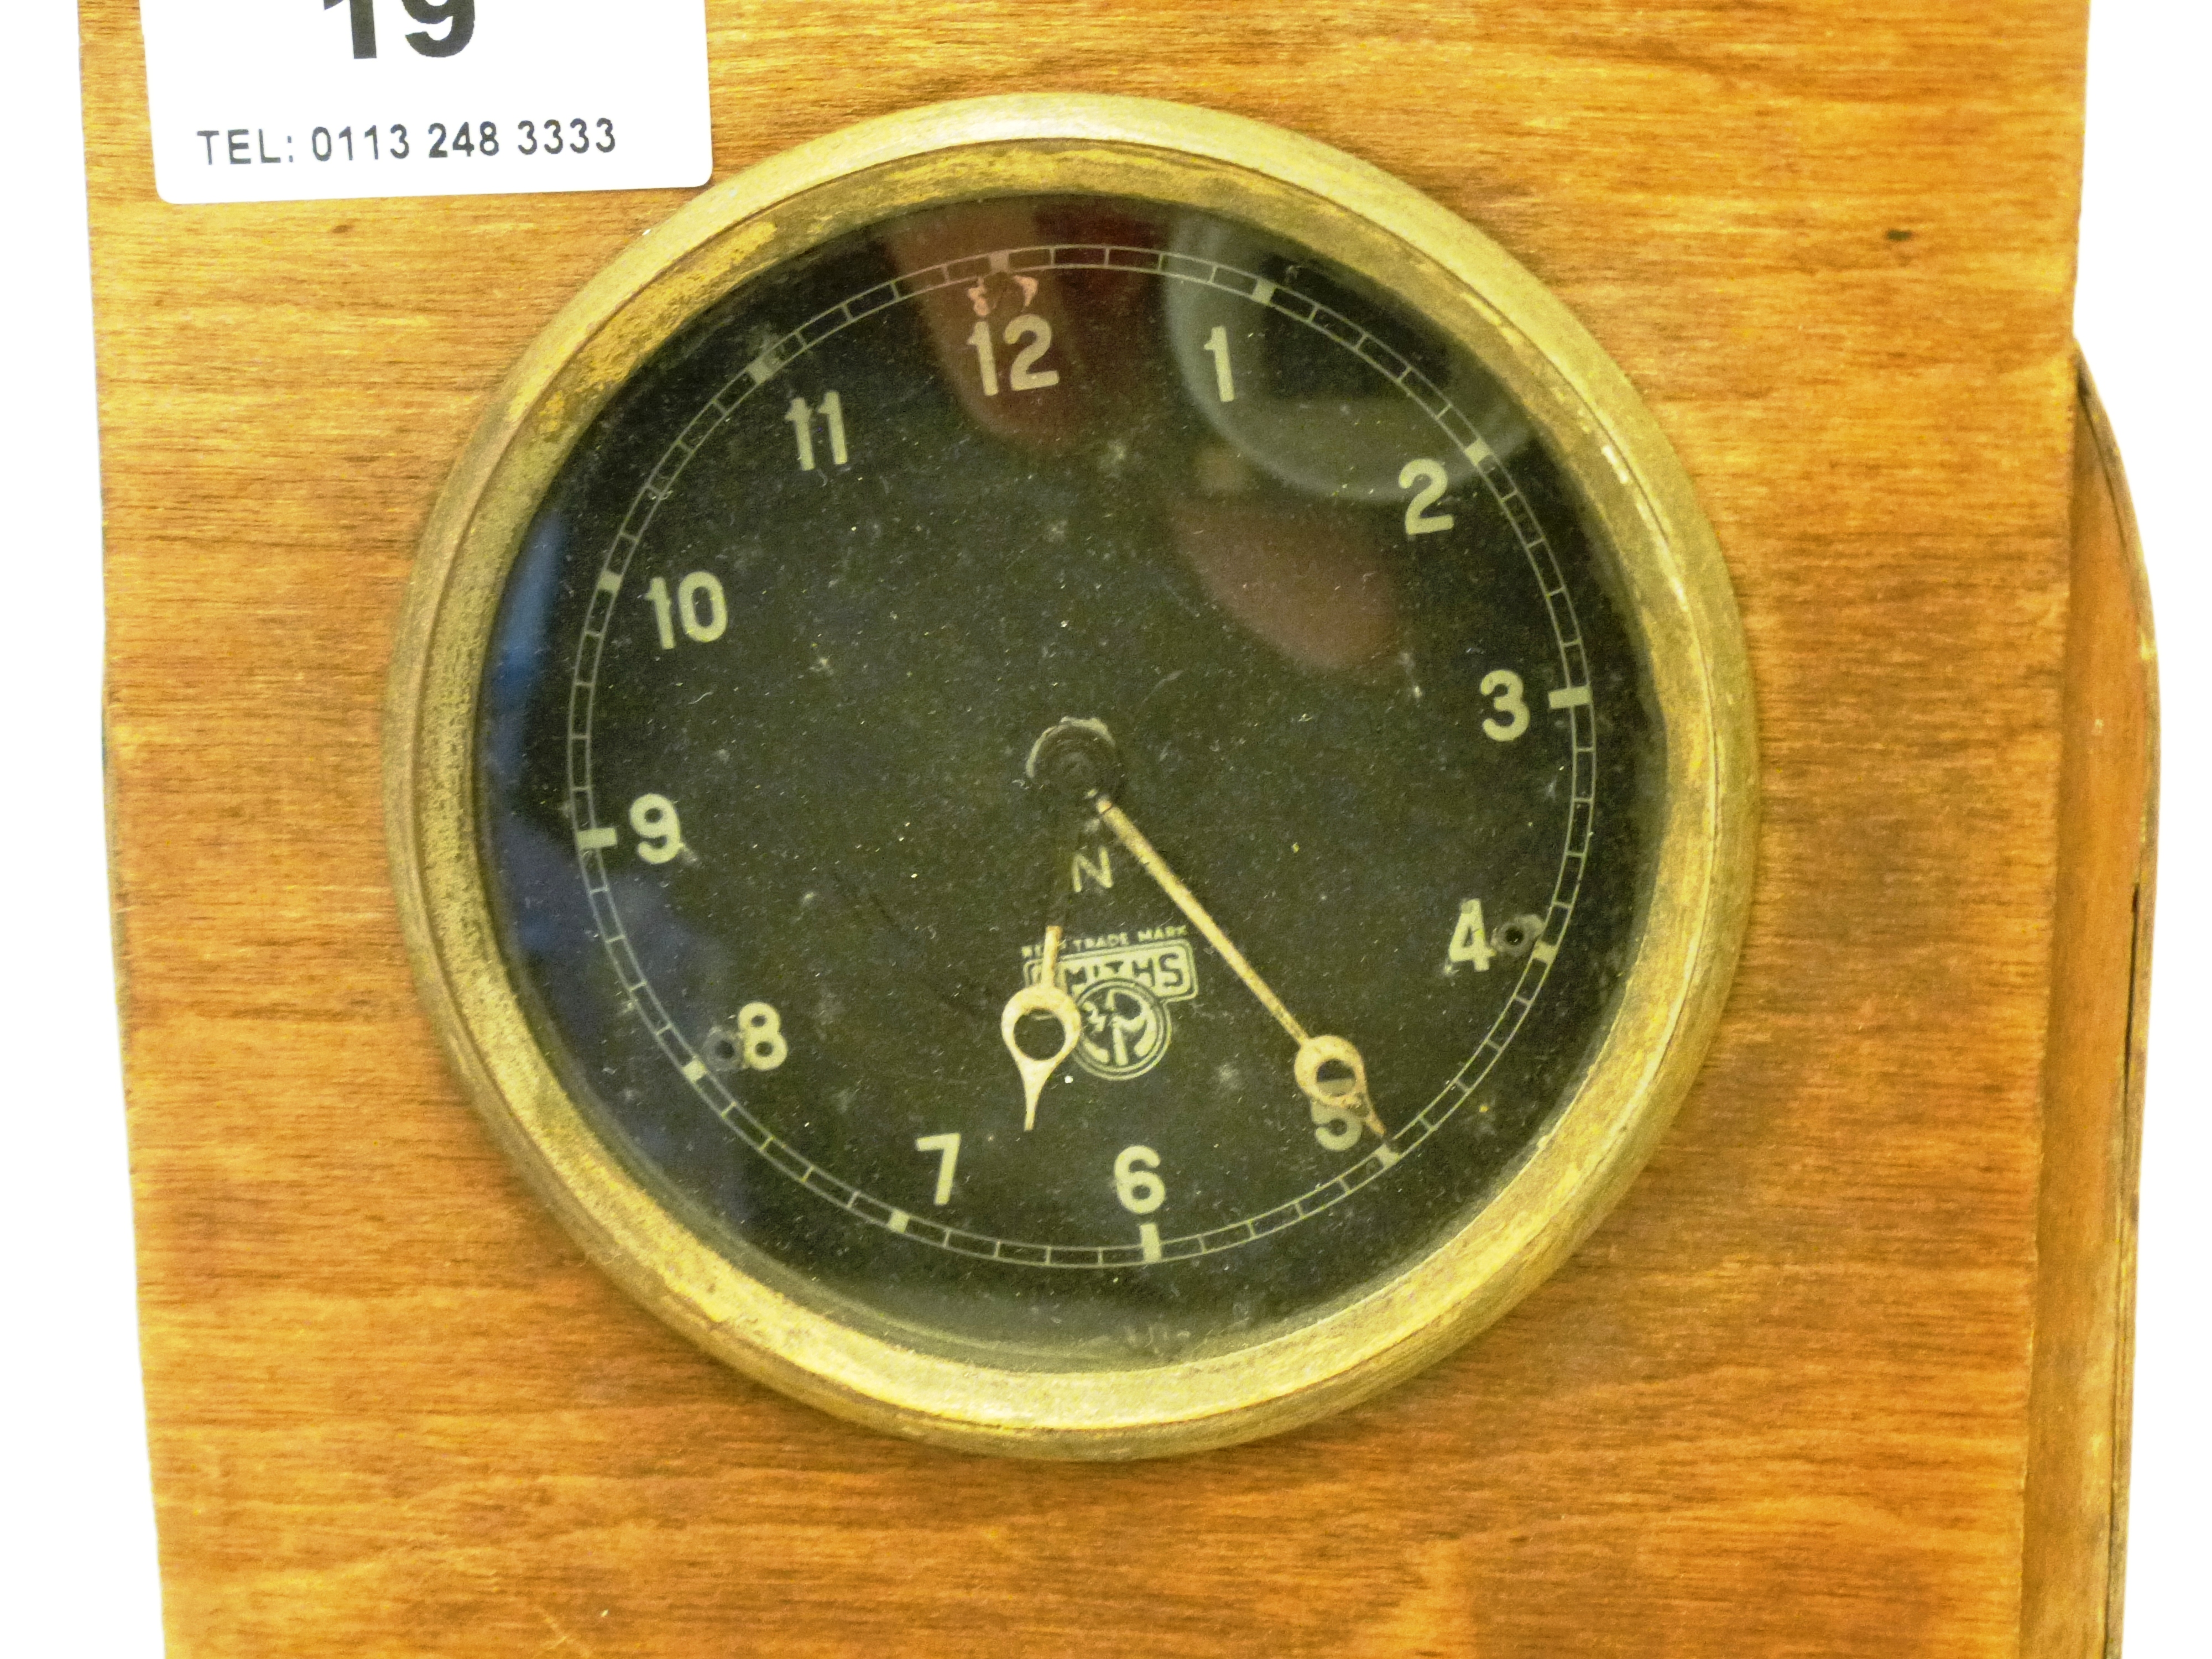 SMITHS DASHBOARD CLOCK - Image 2 of 4